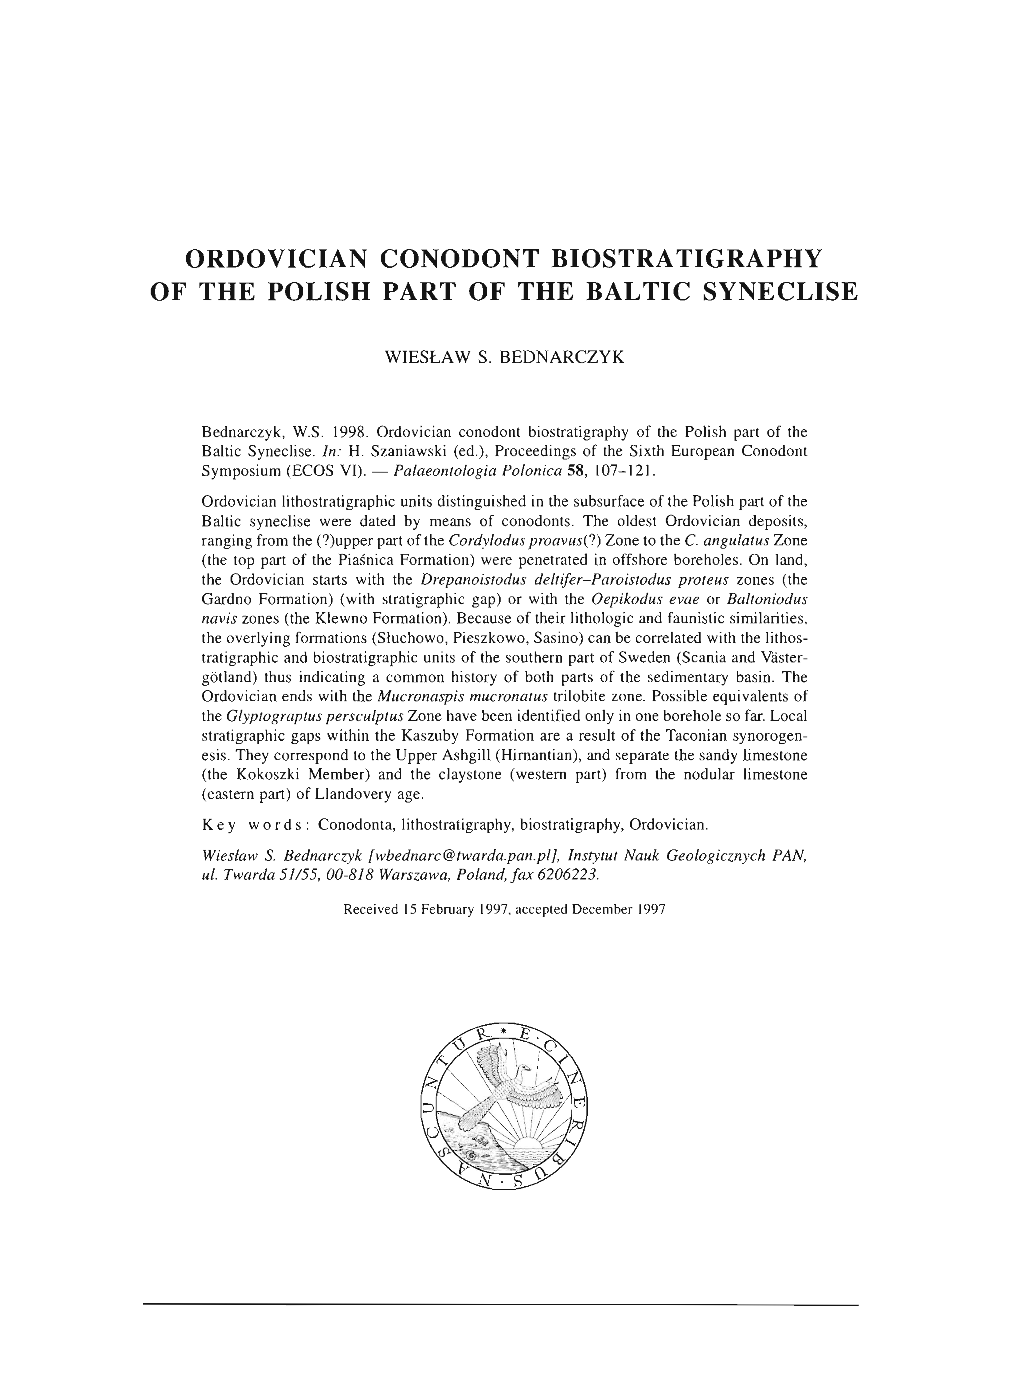 Ordovician Conodont Biostratigraphy of the Polish Part of the Baltic Syneclise